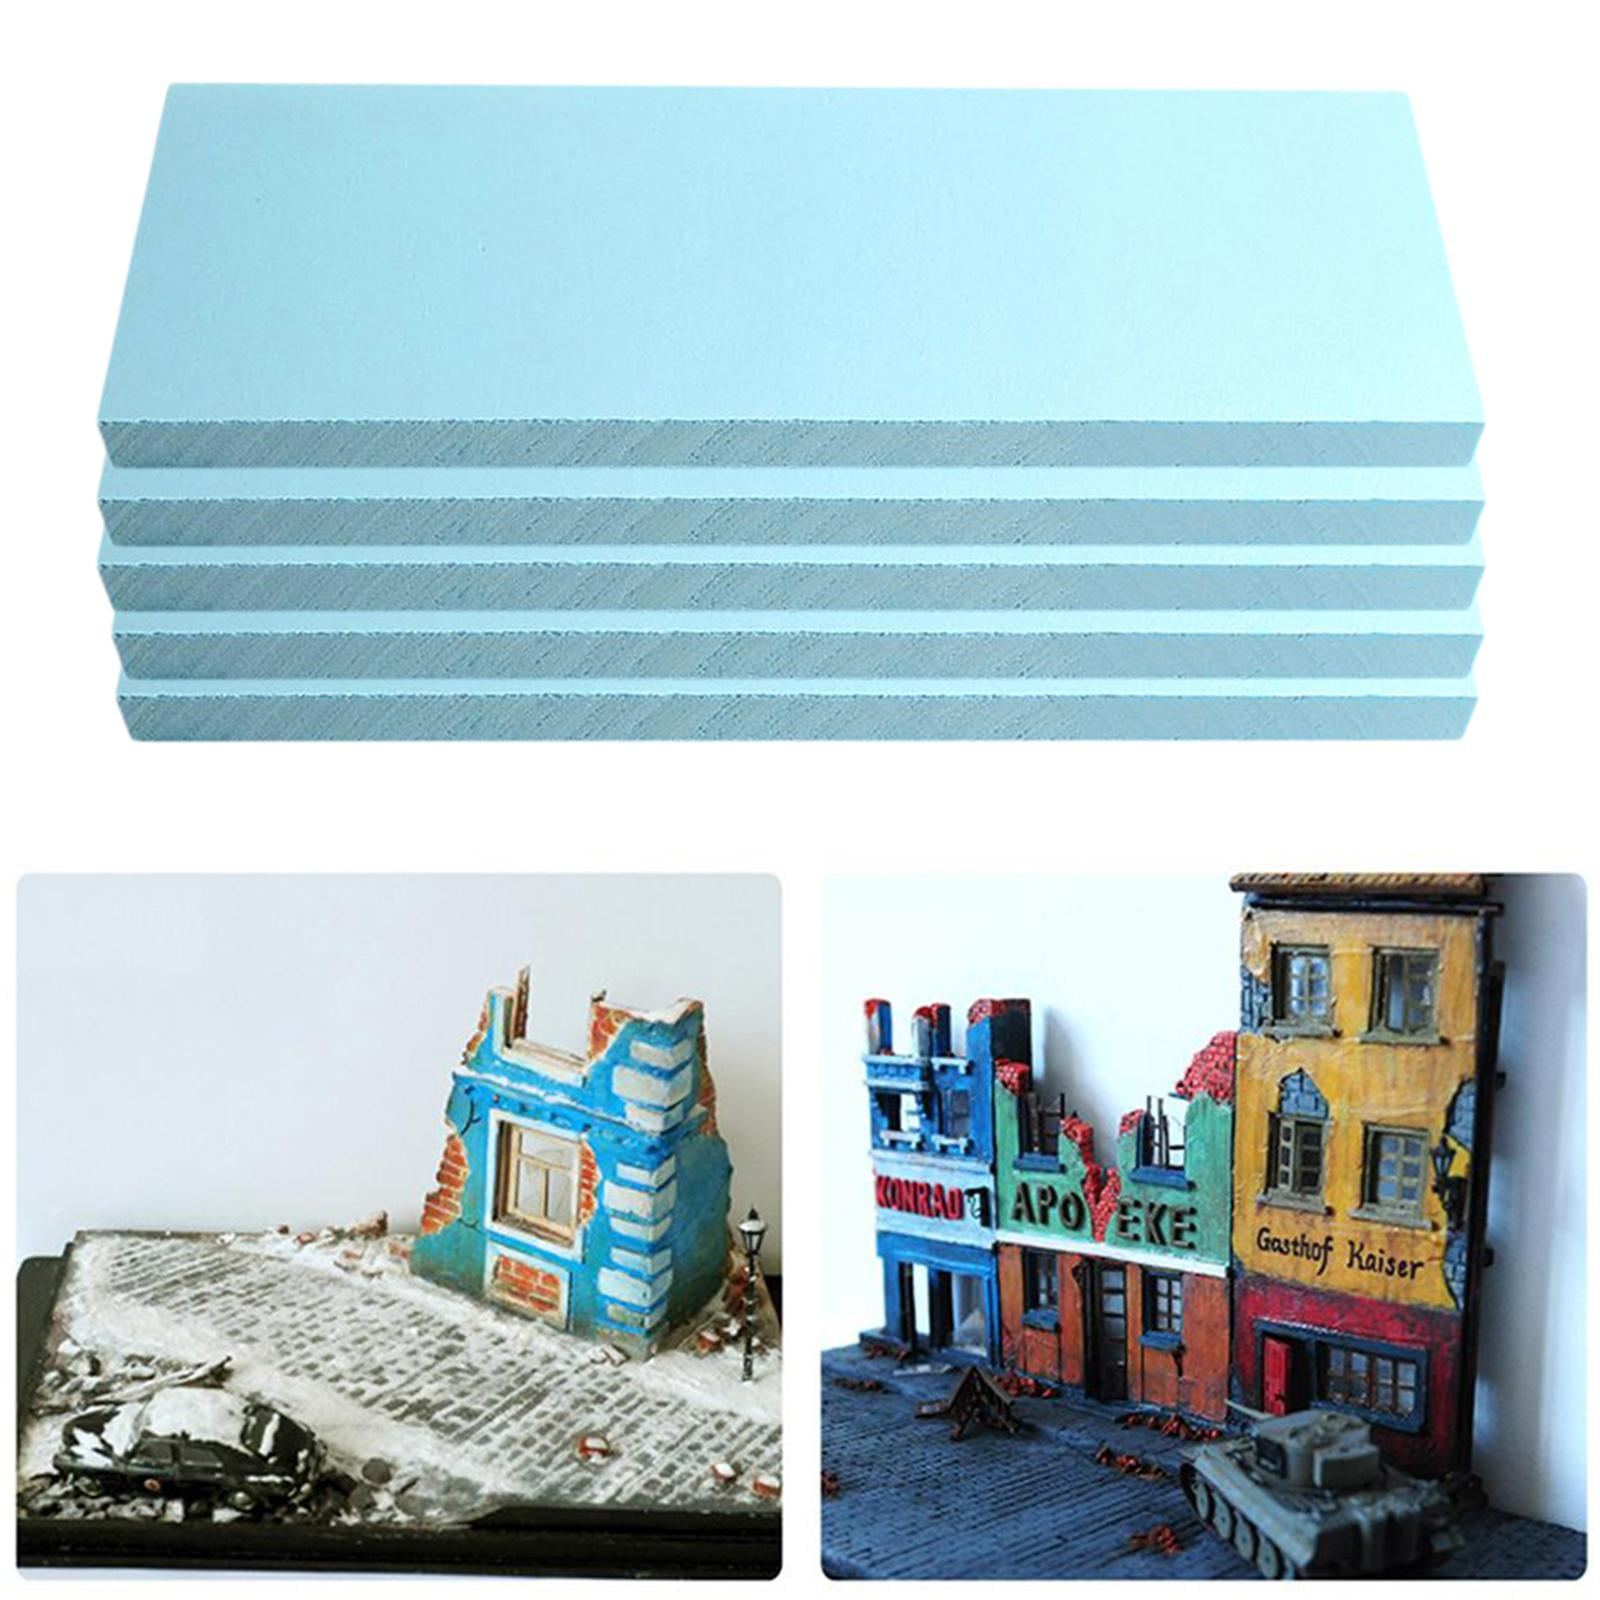 Modeling and Floral Arrangements Details about   295x100x30mm Blue Foam Blocks for Crafting 